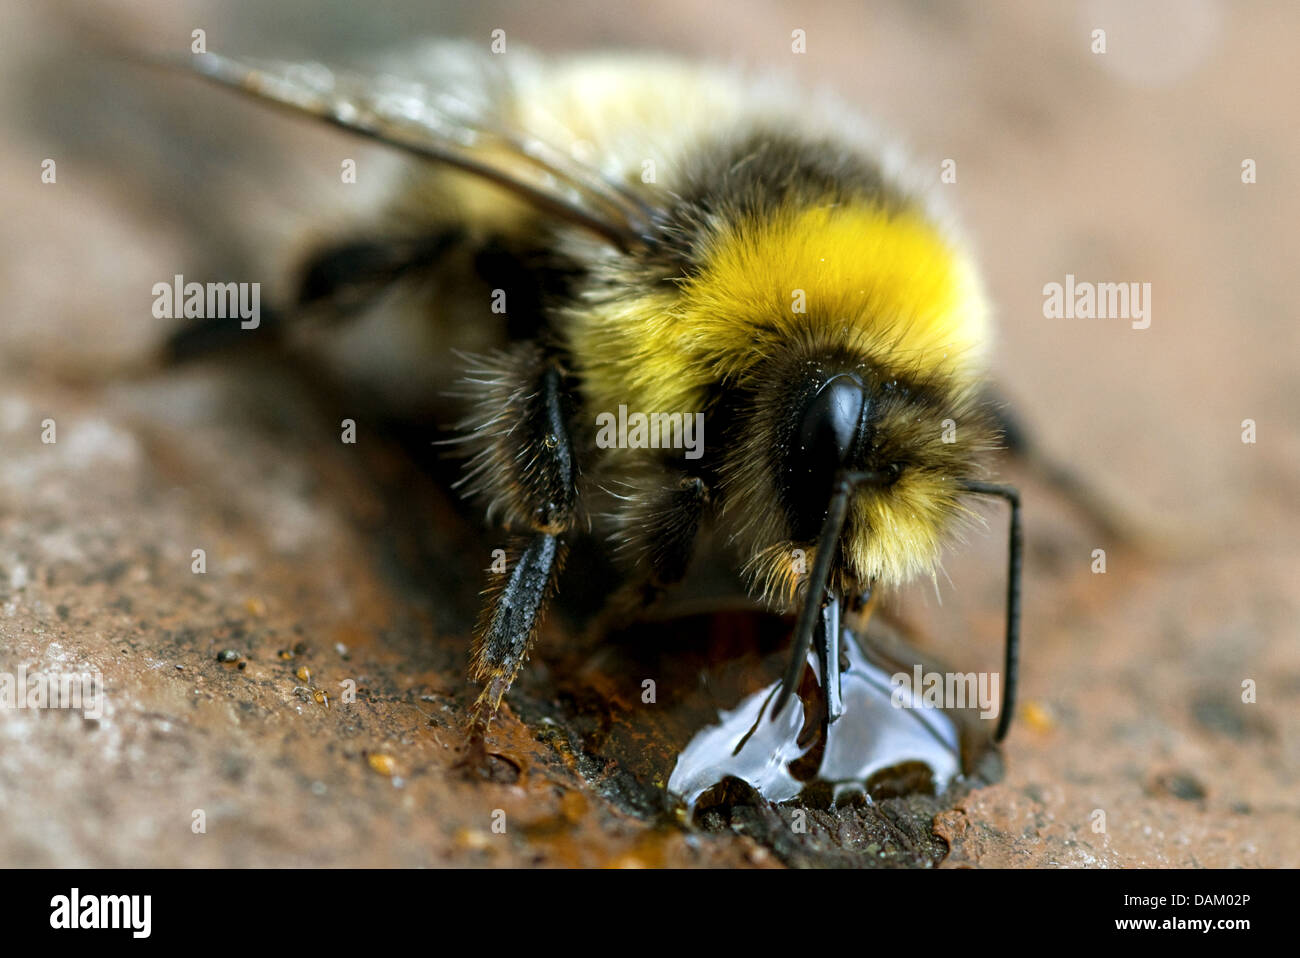 buff-tailed bumble bee (Bombus terrestris), sitting on soil ground drinking from a water drop, United Kingdom, Scotland, Cairngorms National Park Stock Photo